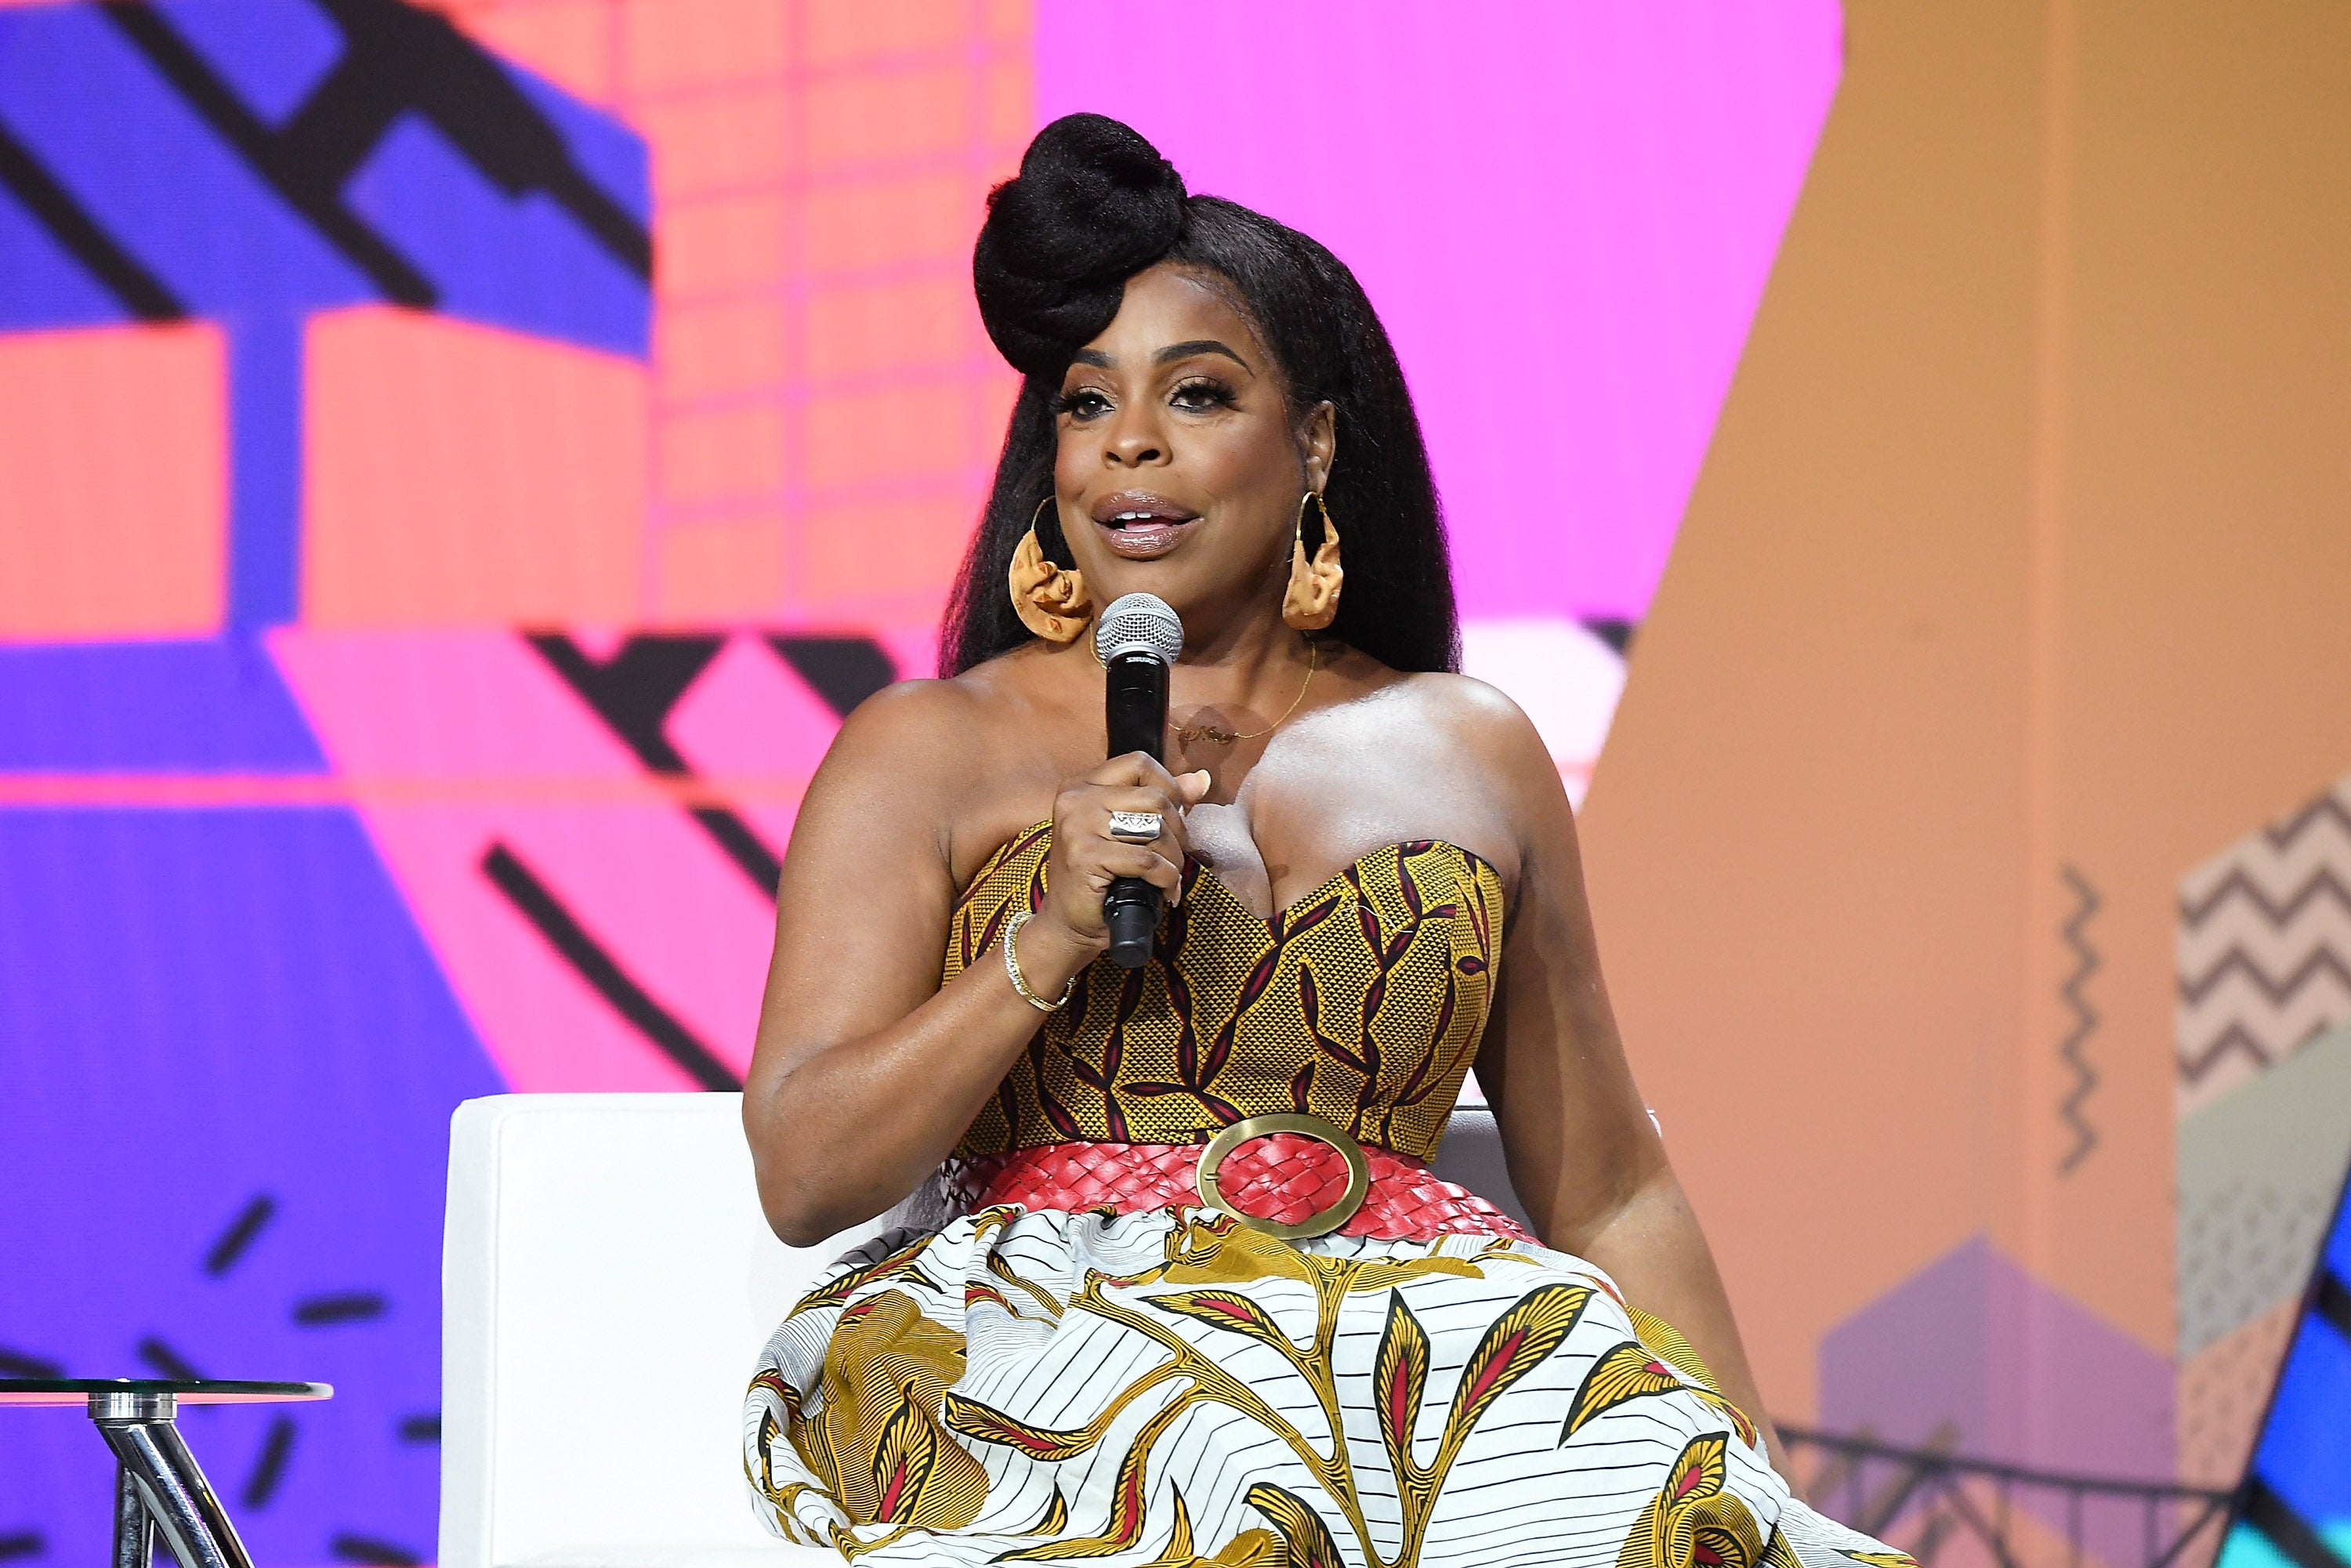 These Words Of Wisdom From Niecy Nash on the Importance Of Self-Esteem and Making Room for Others Are Right on Time
